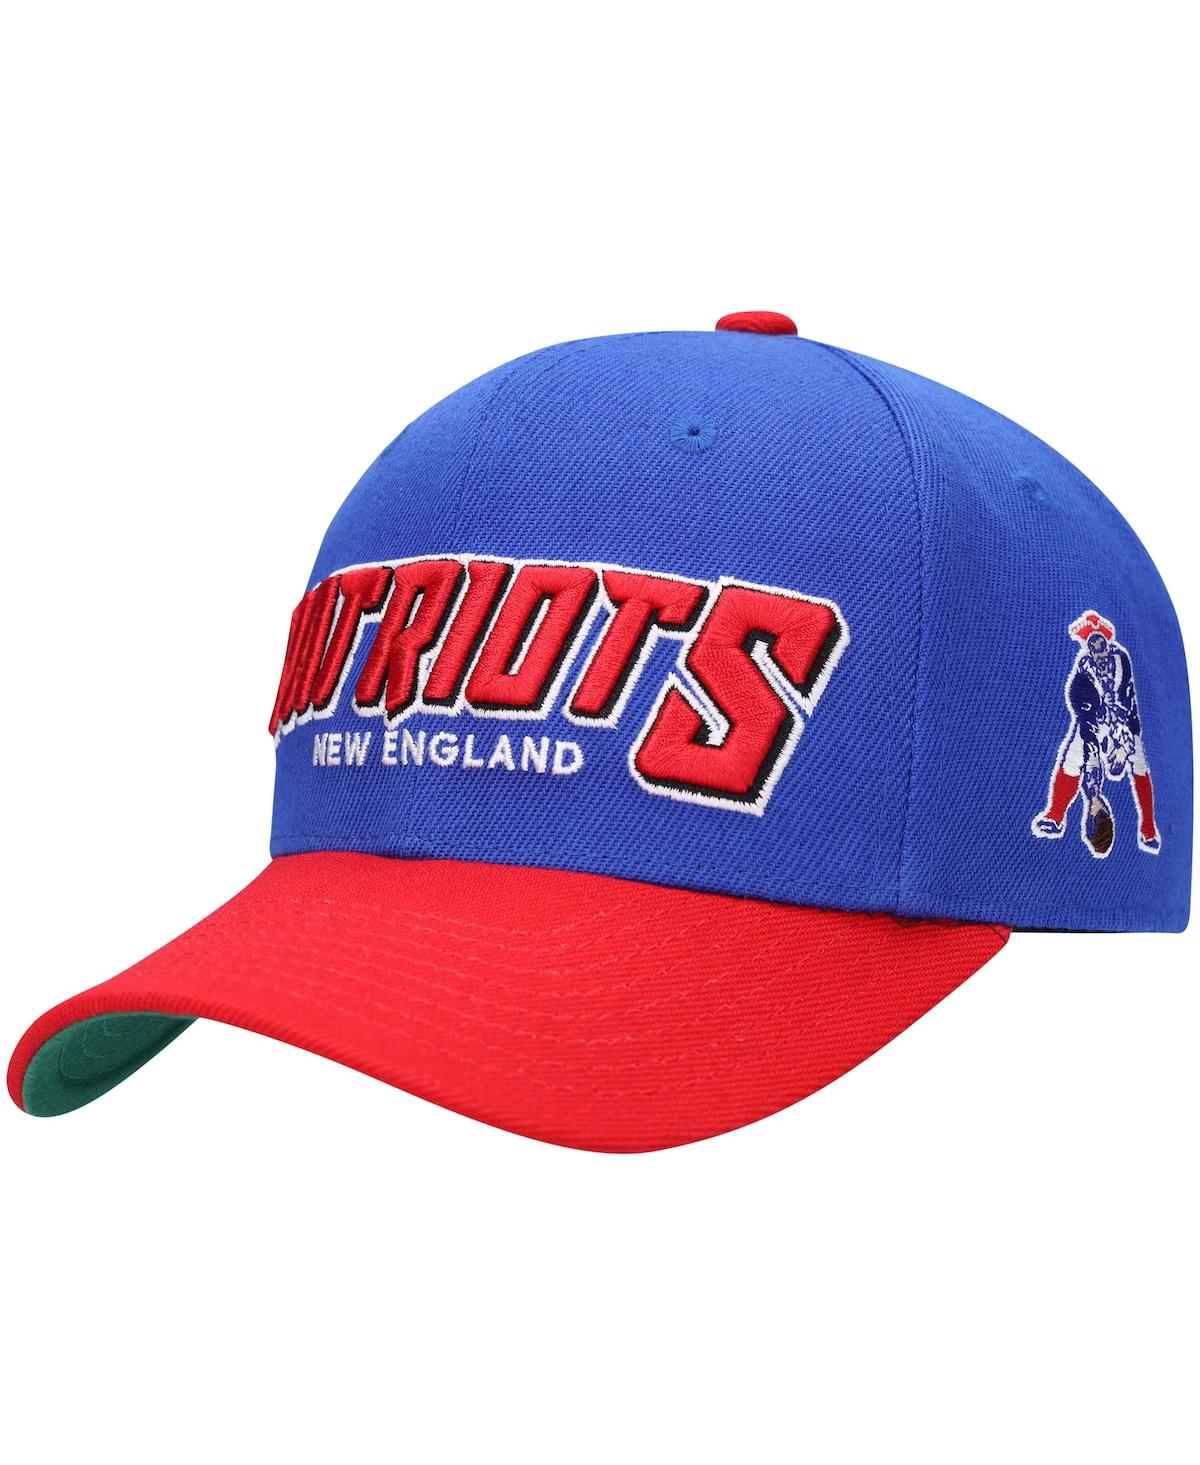 Mitchell & Ness Kids' Big Boys And Girls  Royal, Red New England Patriots Shredder Adjustable Hat In Royal,red